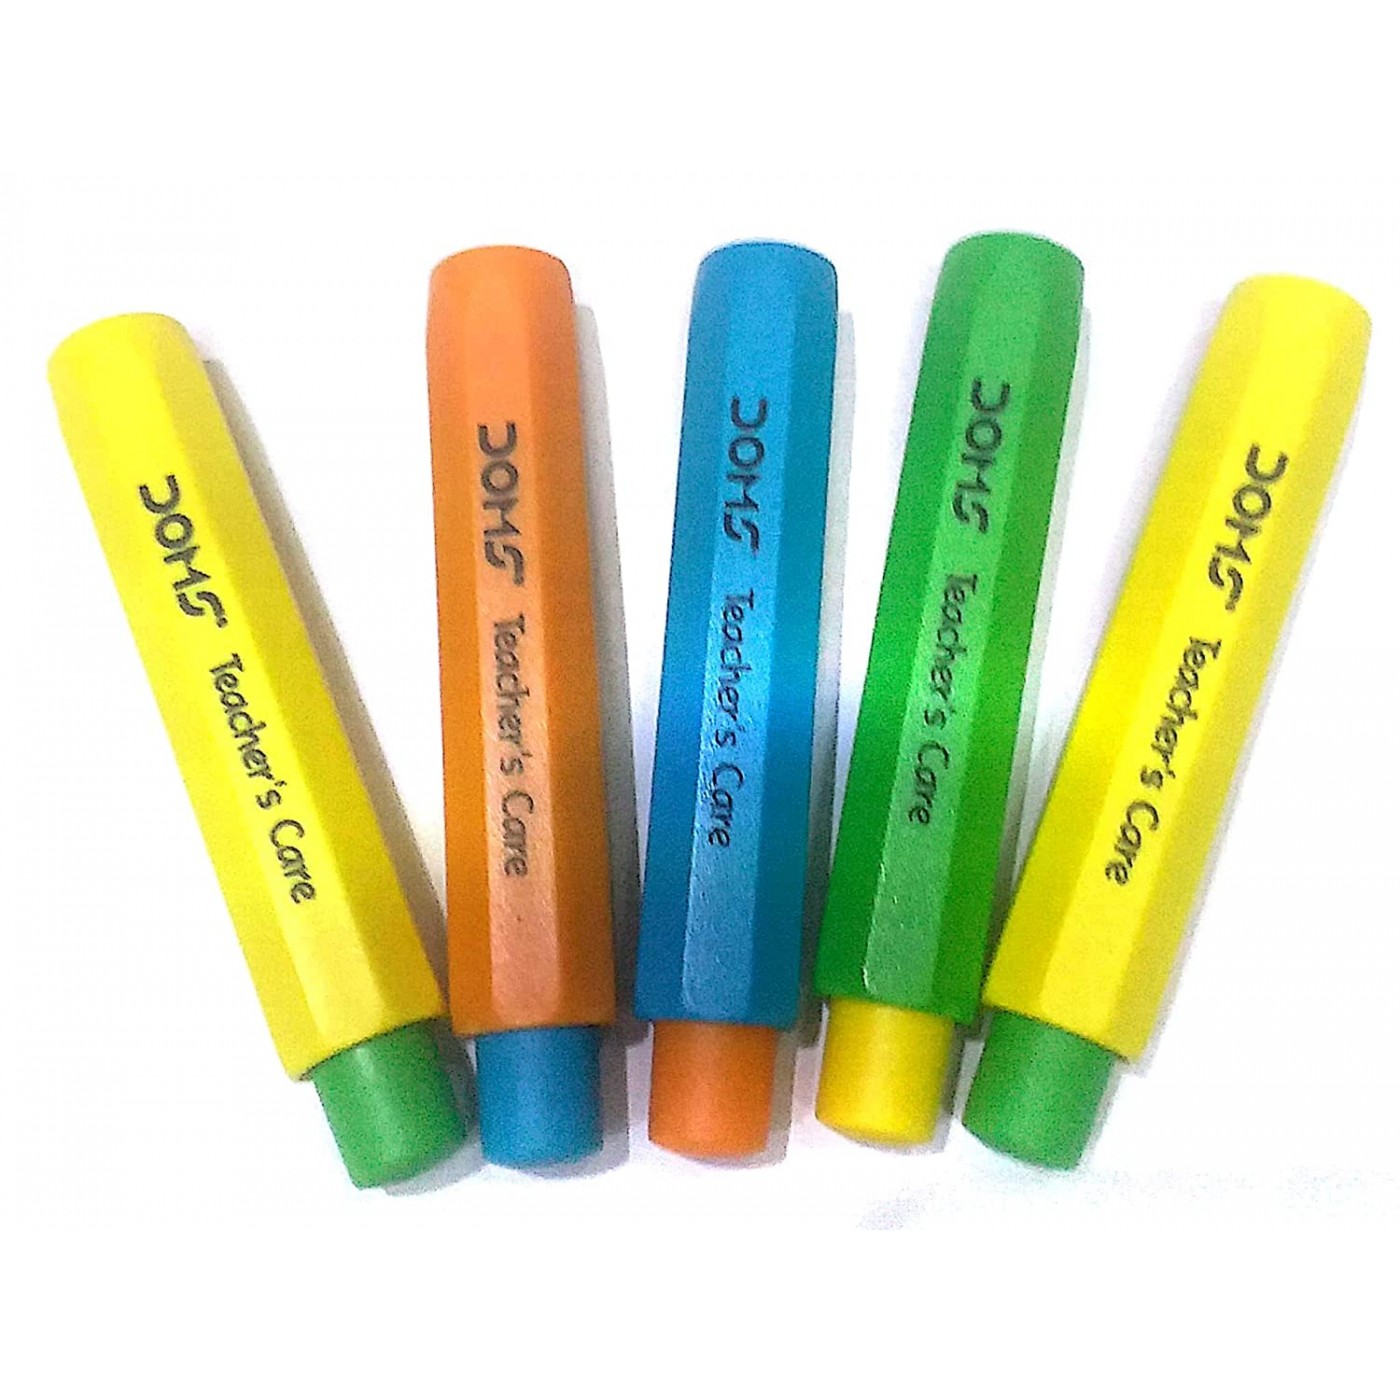 WEIMY 5 Pack Adjustable Chalk Clip Chalk Holder for Teachers Kids School Office Drawing Board 5 Color 3.7 x 0.6 Pink Orange Green Blue Yellow 